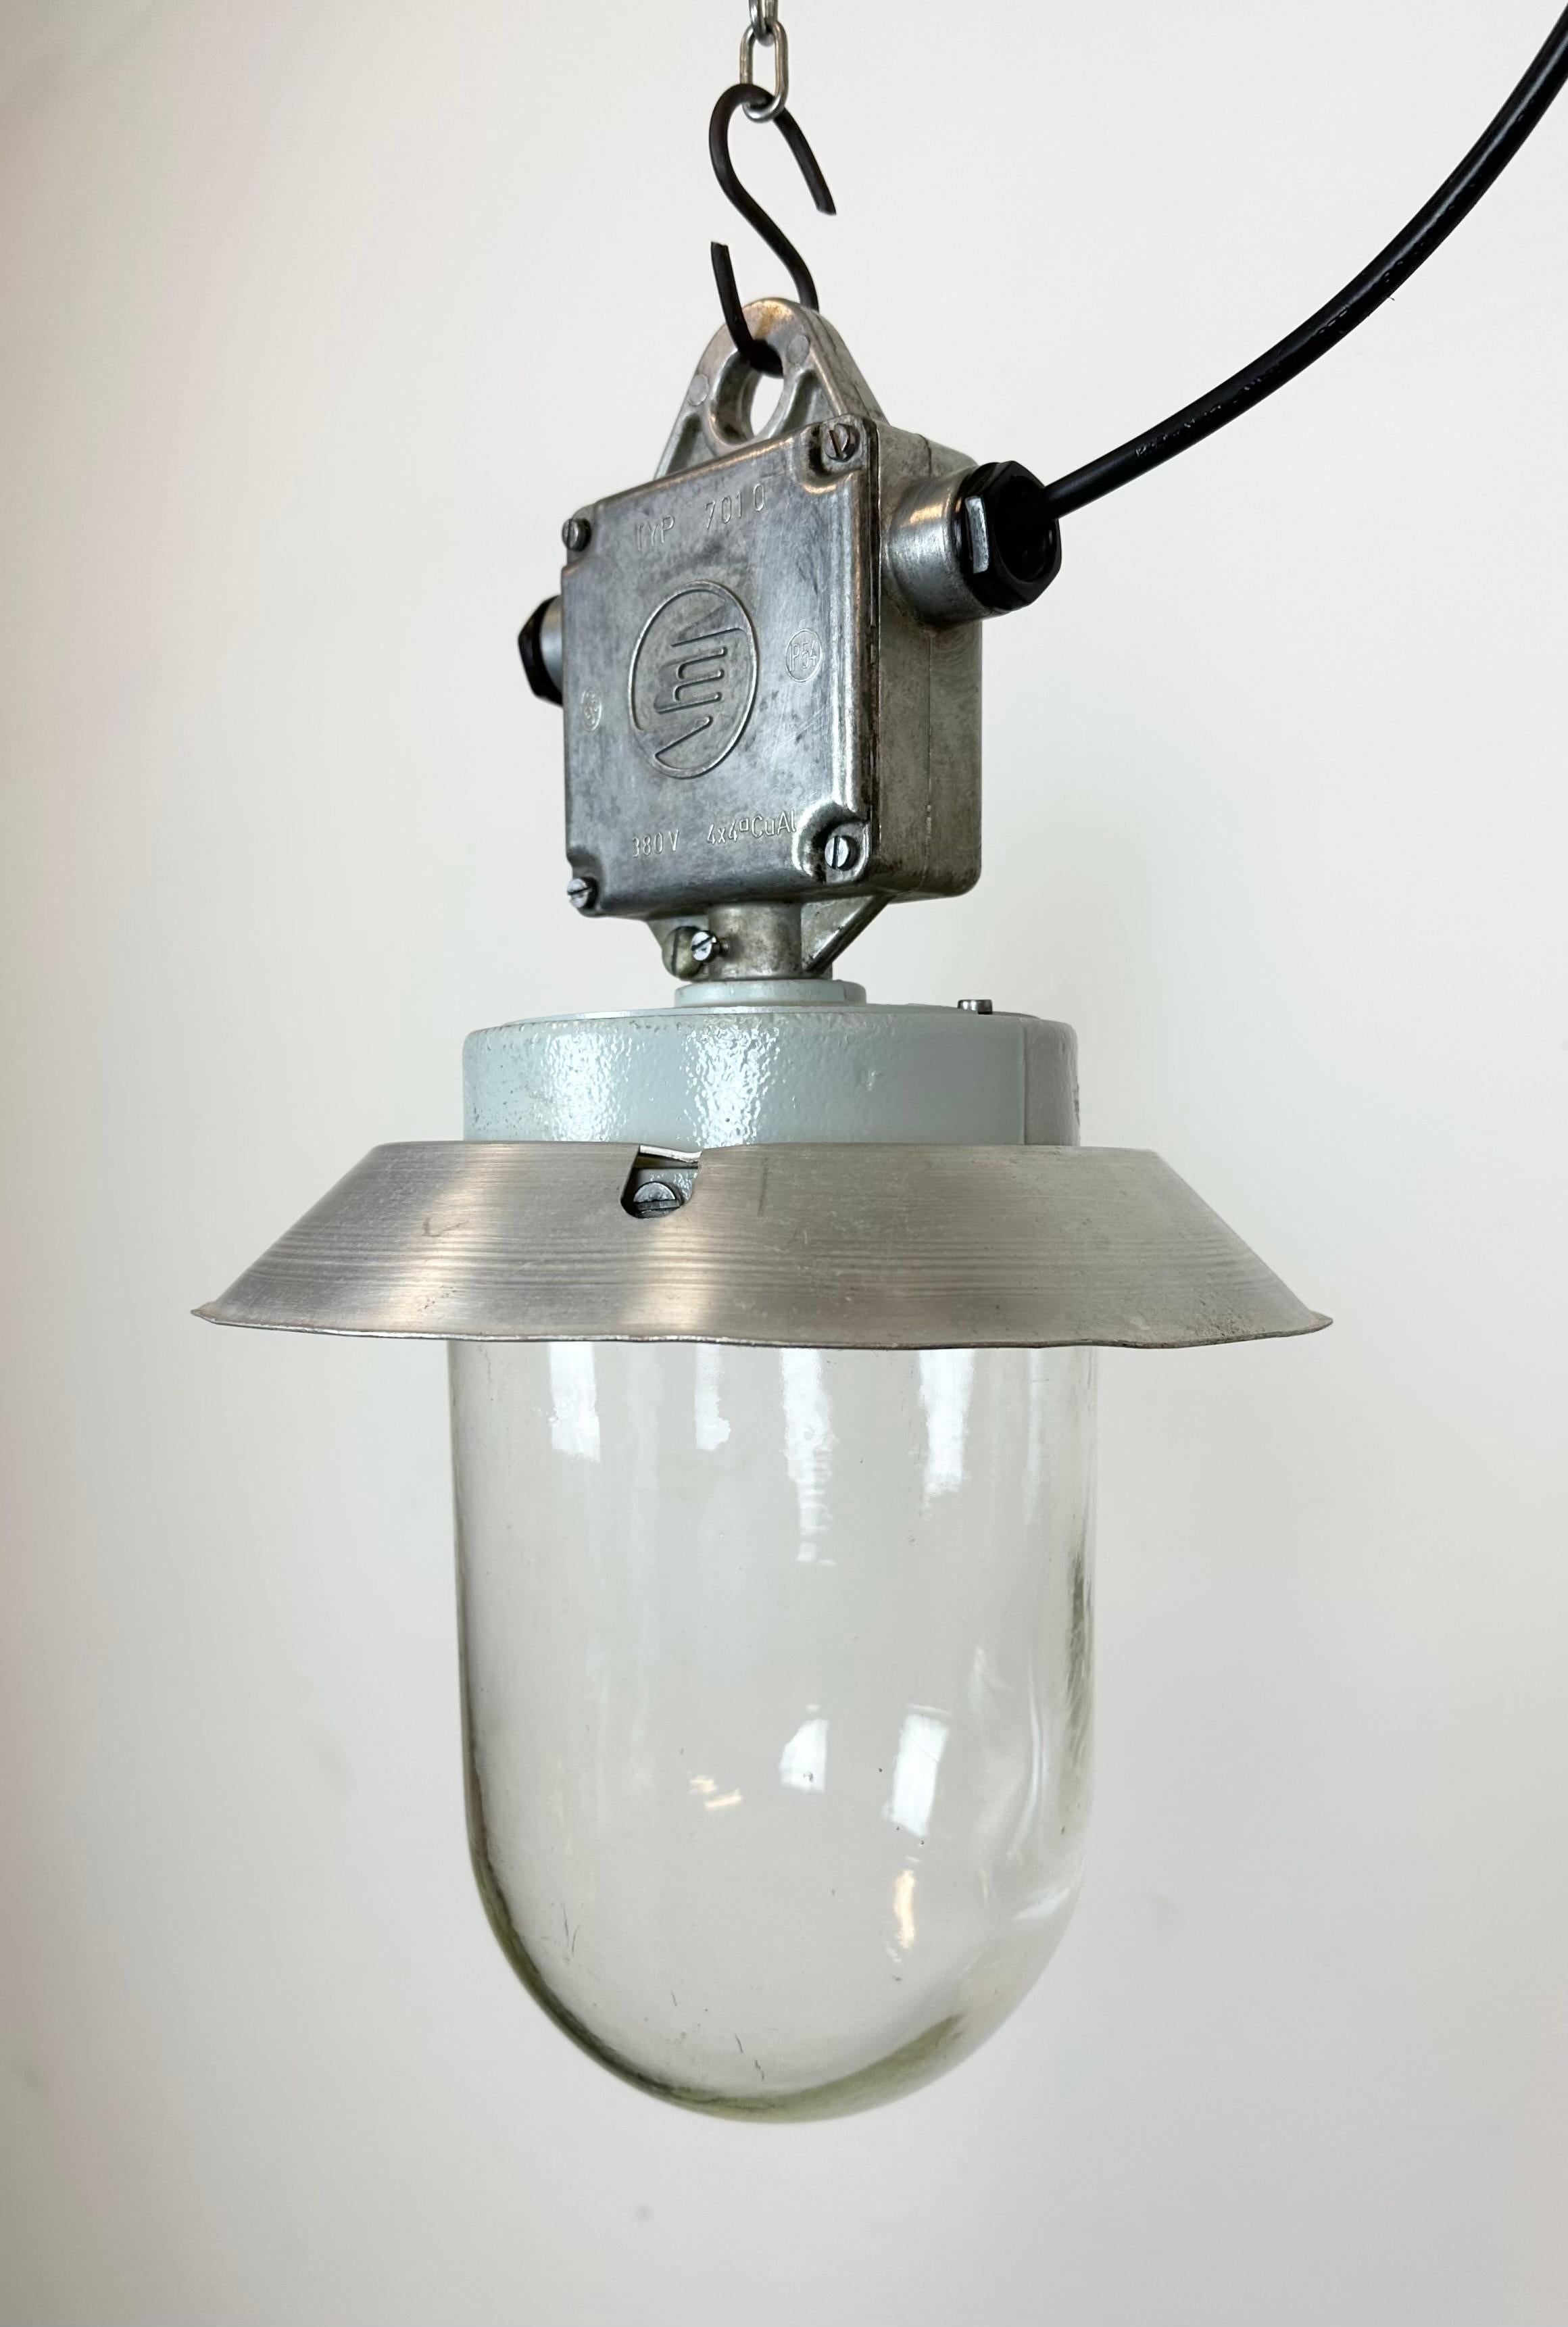 Czech Industrial Aluminium Light with Clear Glass Cover from Elektrosvit, 1970s For Sale